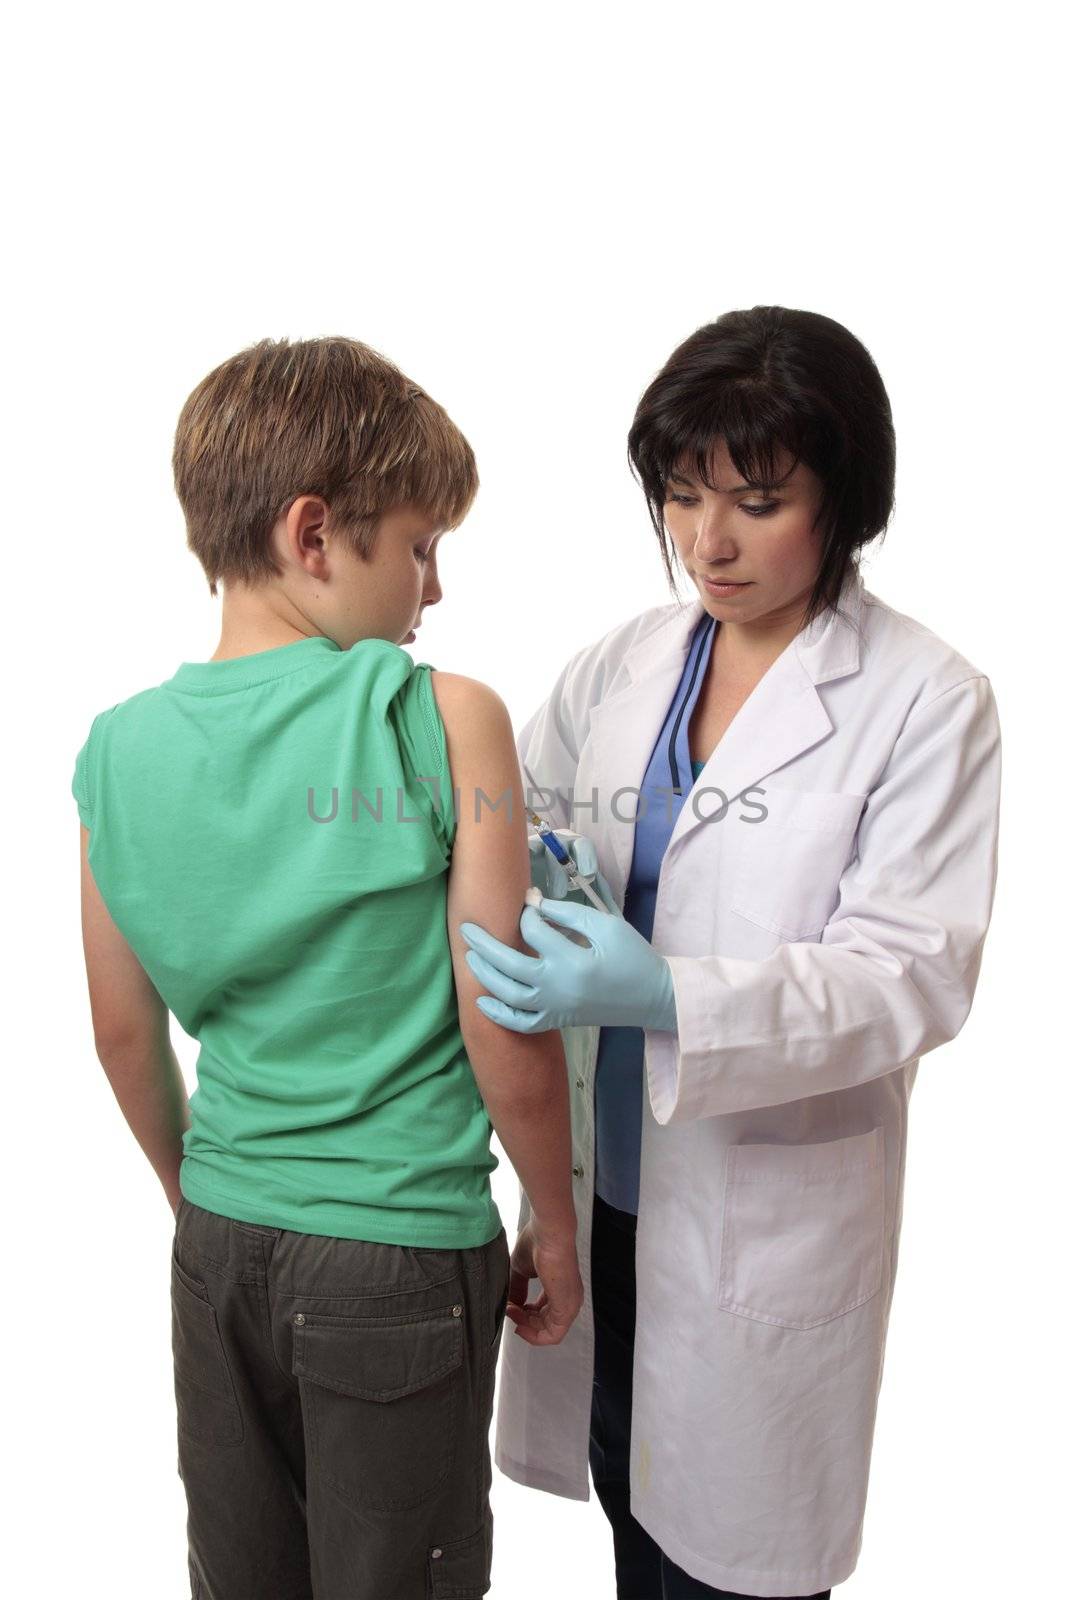 Child vaccination by lovleah